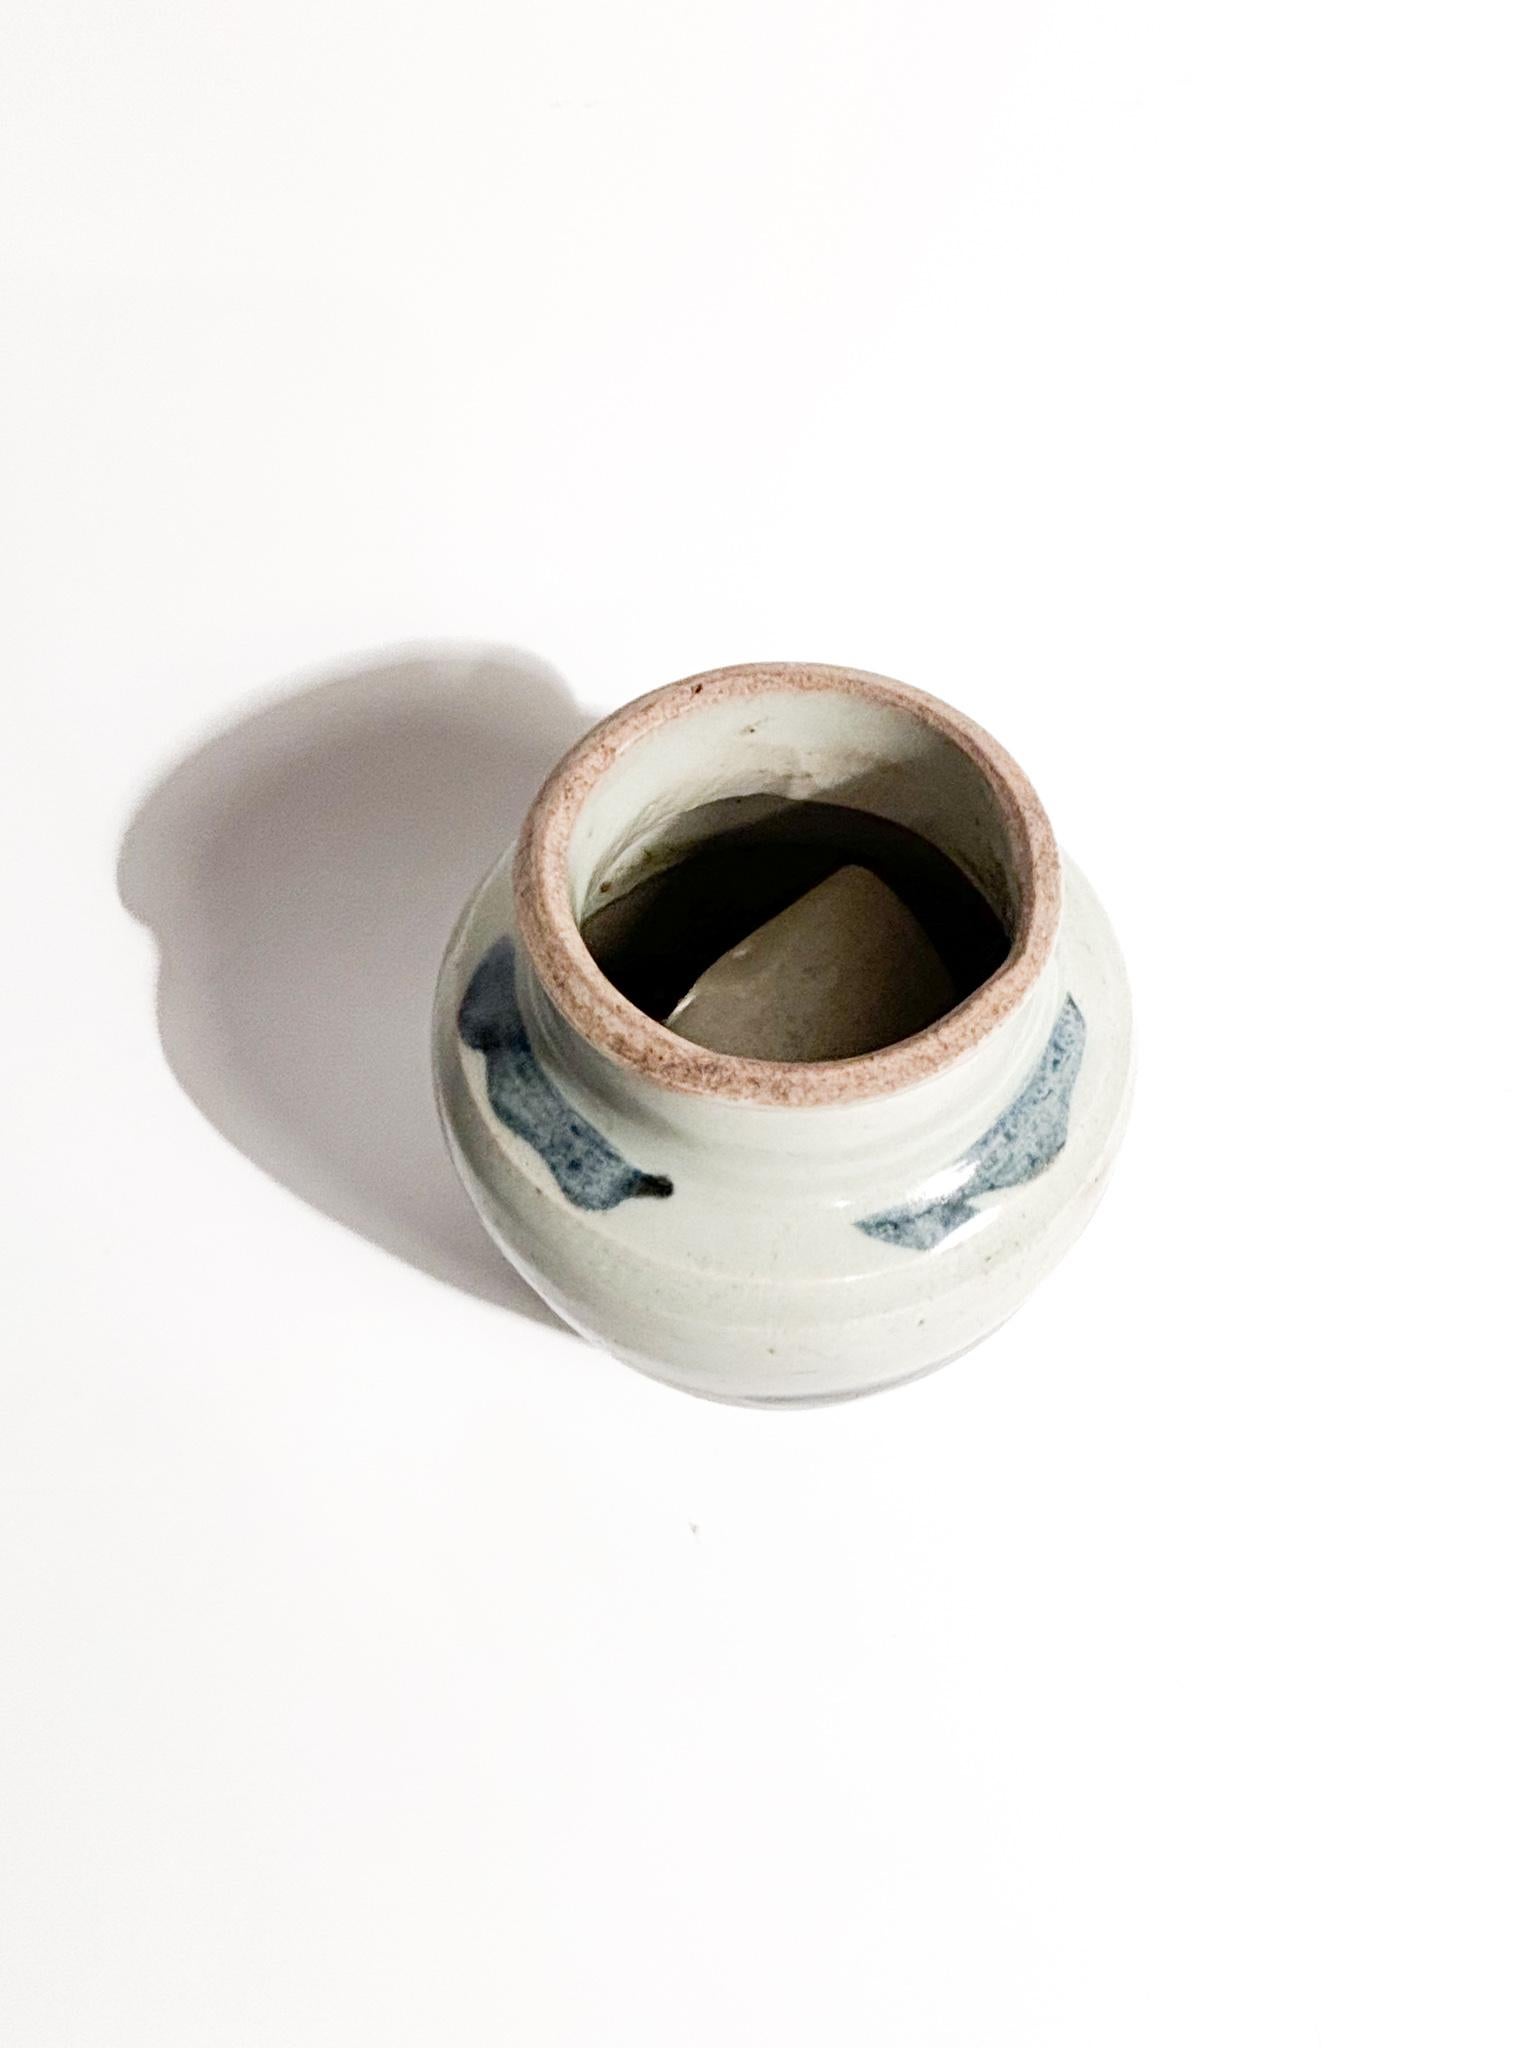 Late 19th Century Chinese Ceramic Vase Qing Dynasty Tung Chih Period (1862 - 1875) For Sale